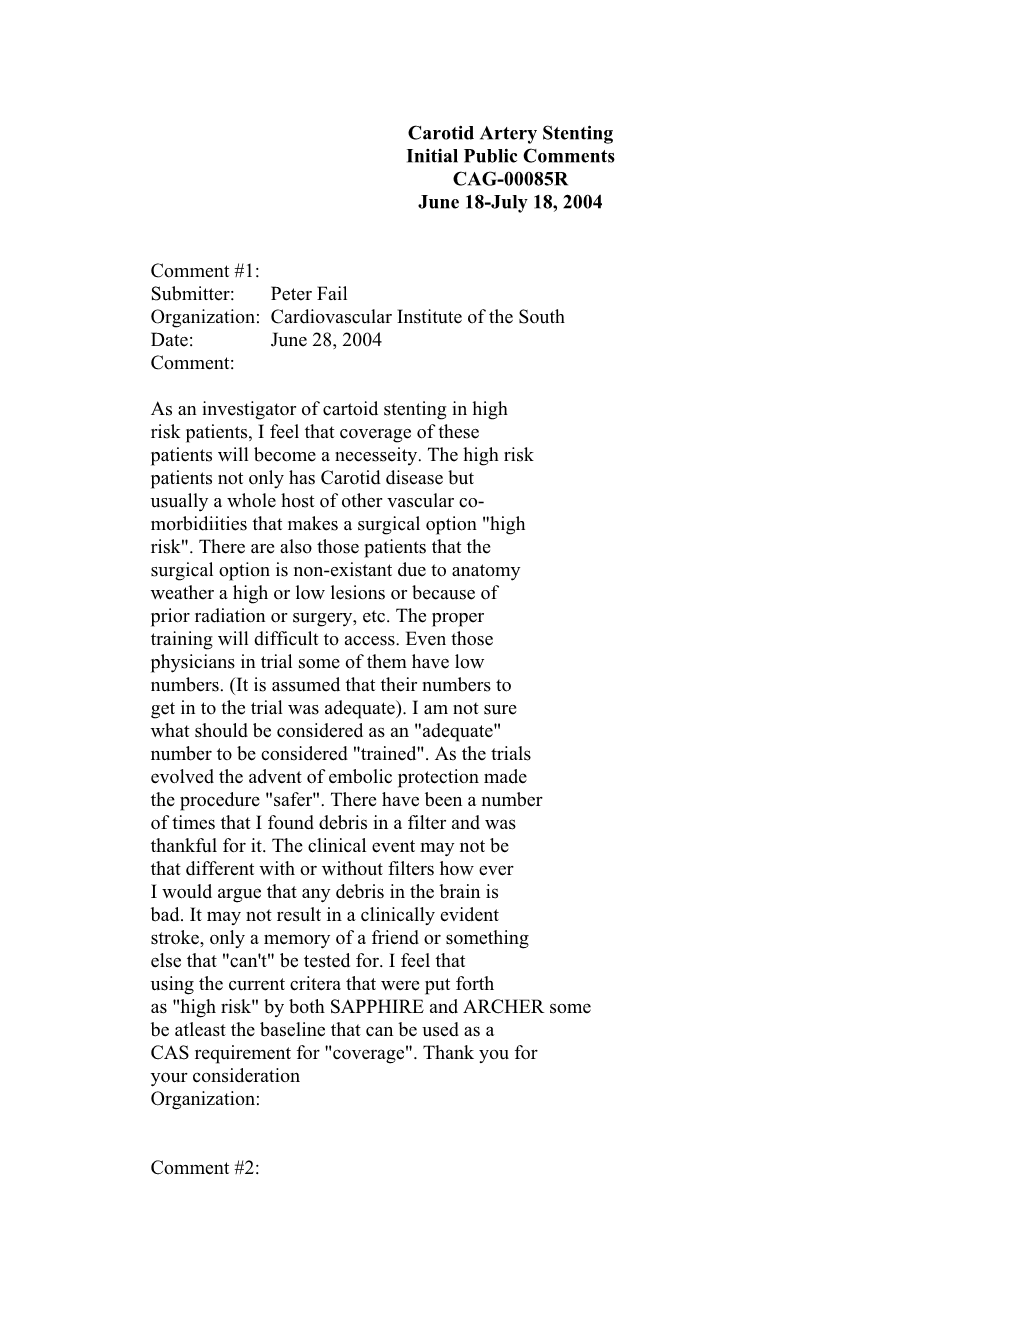 Carotid Artery Stenting Initial Public Comments CAG-00085R June 18-July 18, 2004